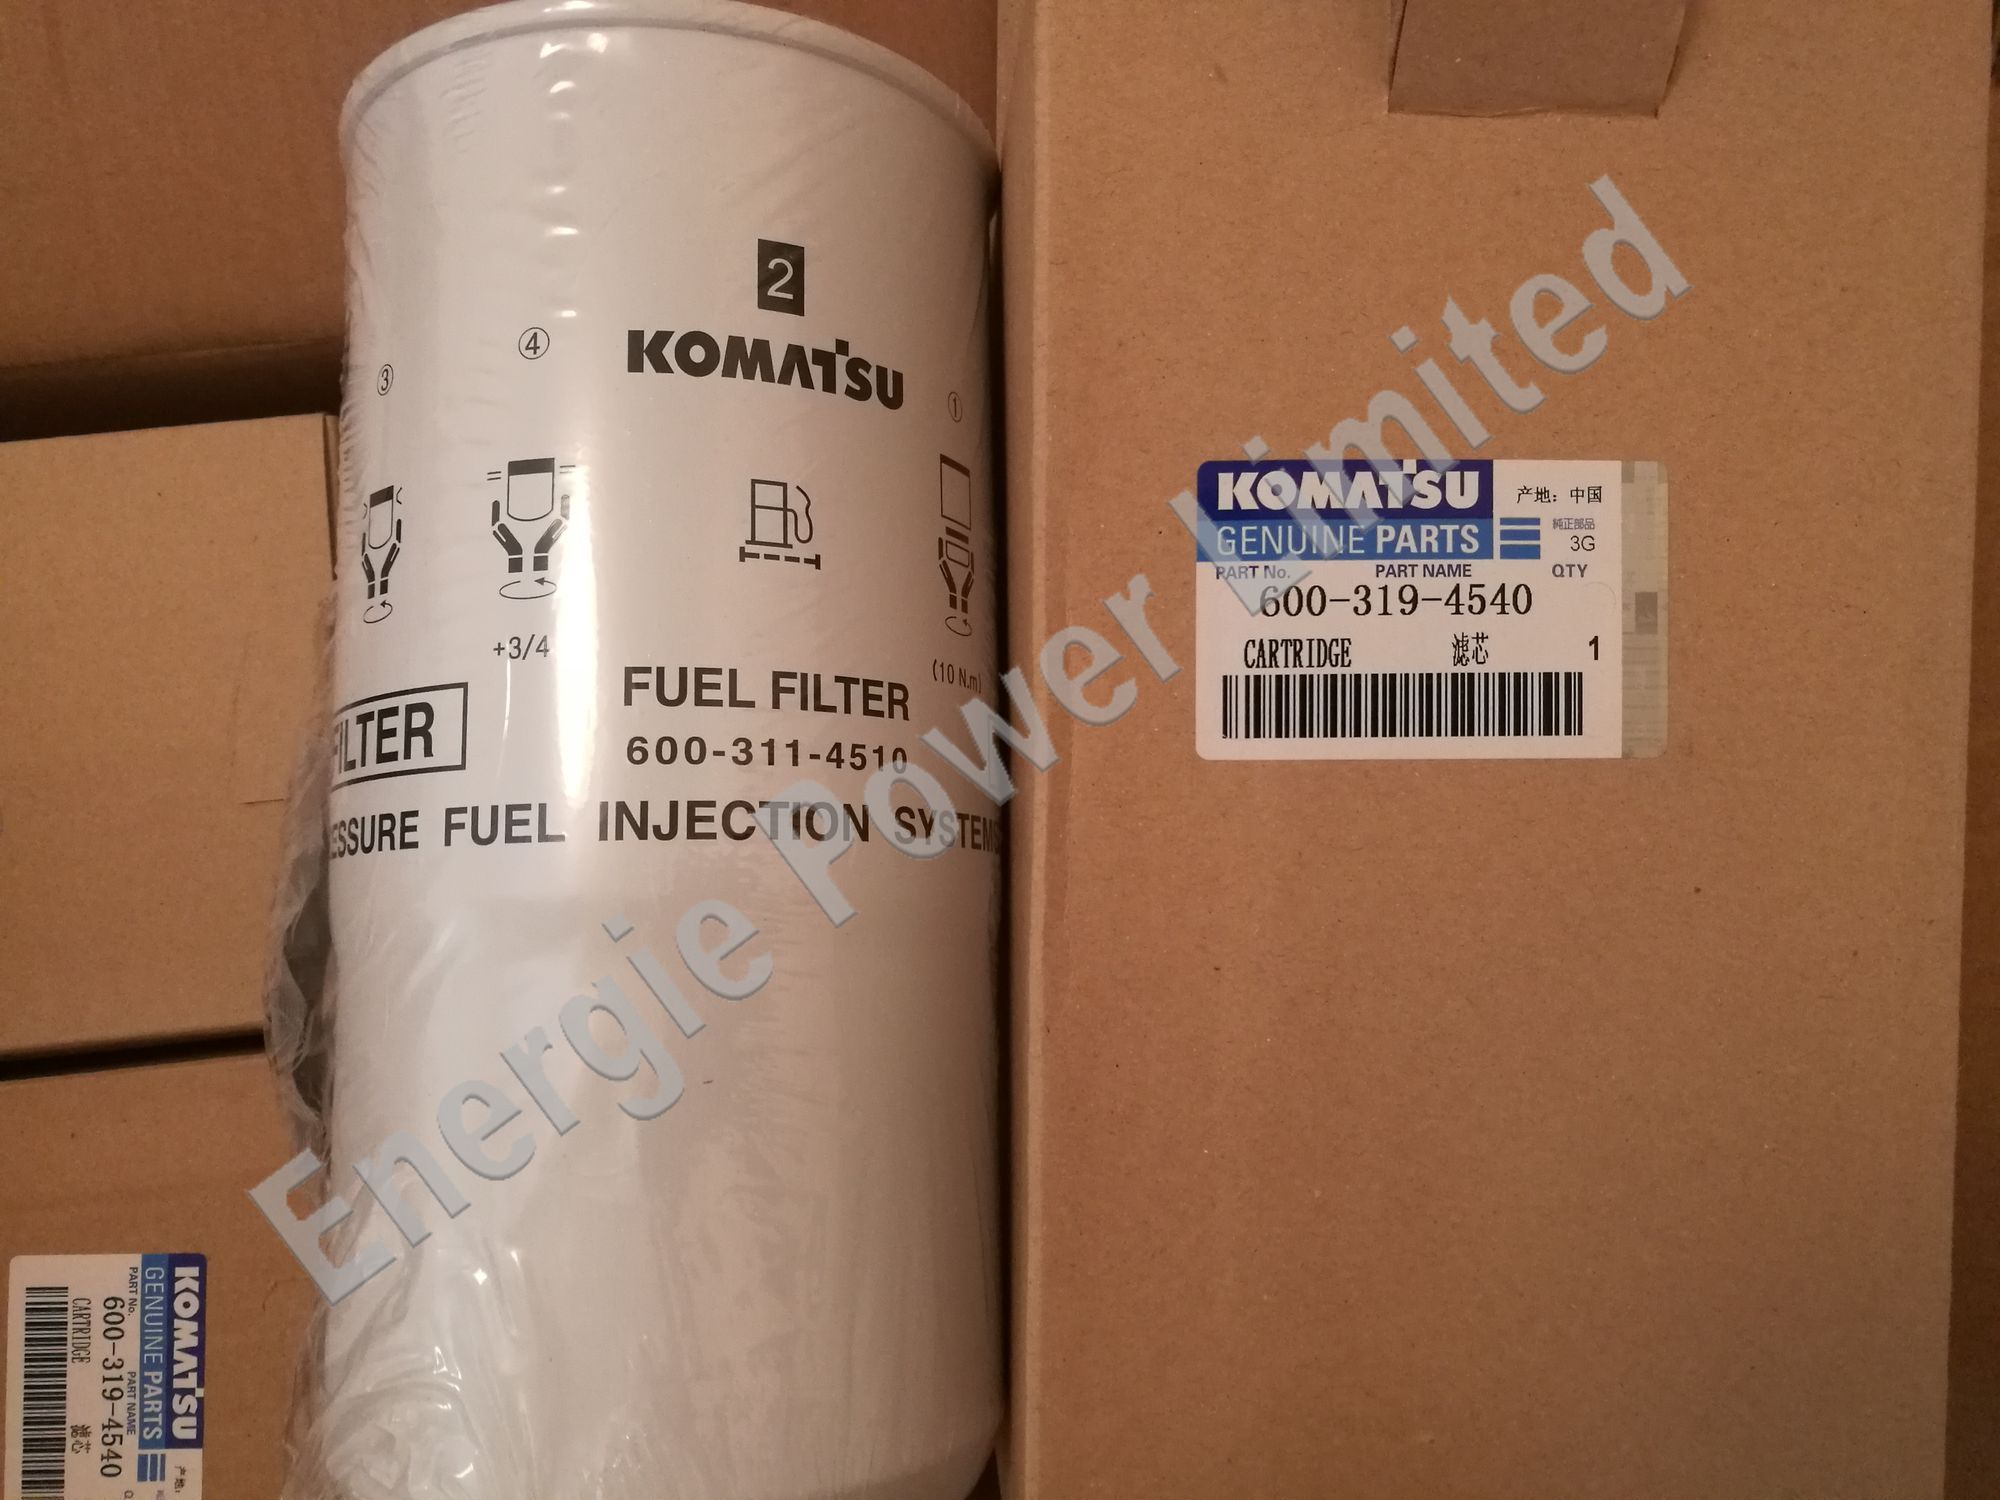 6003194540 fuel filters